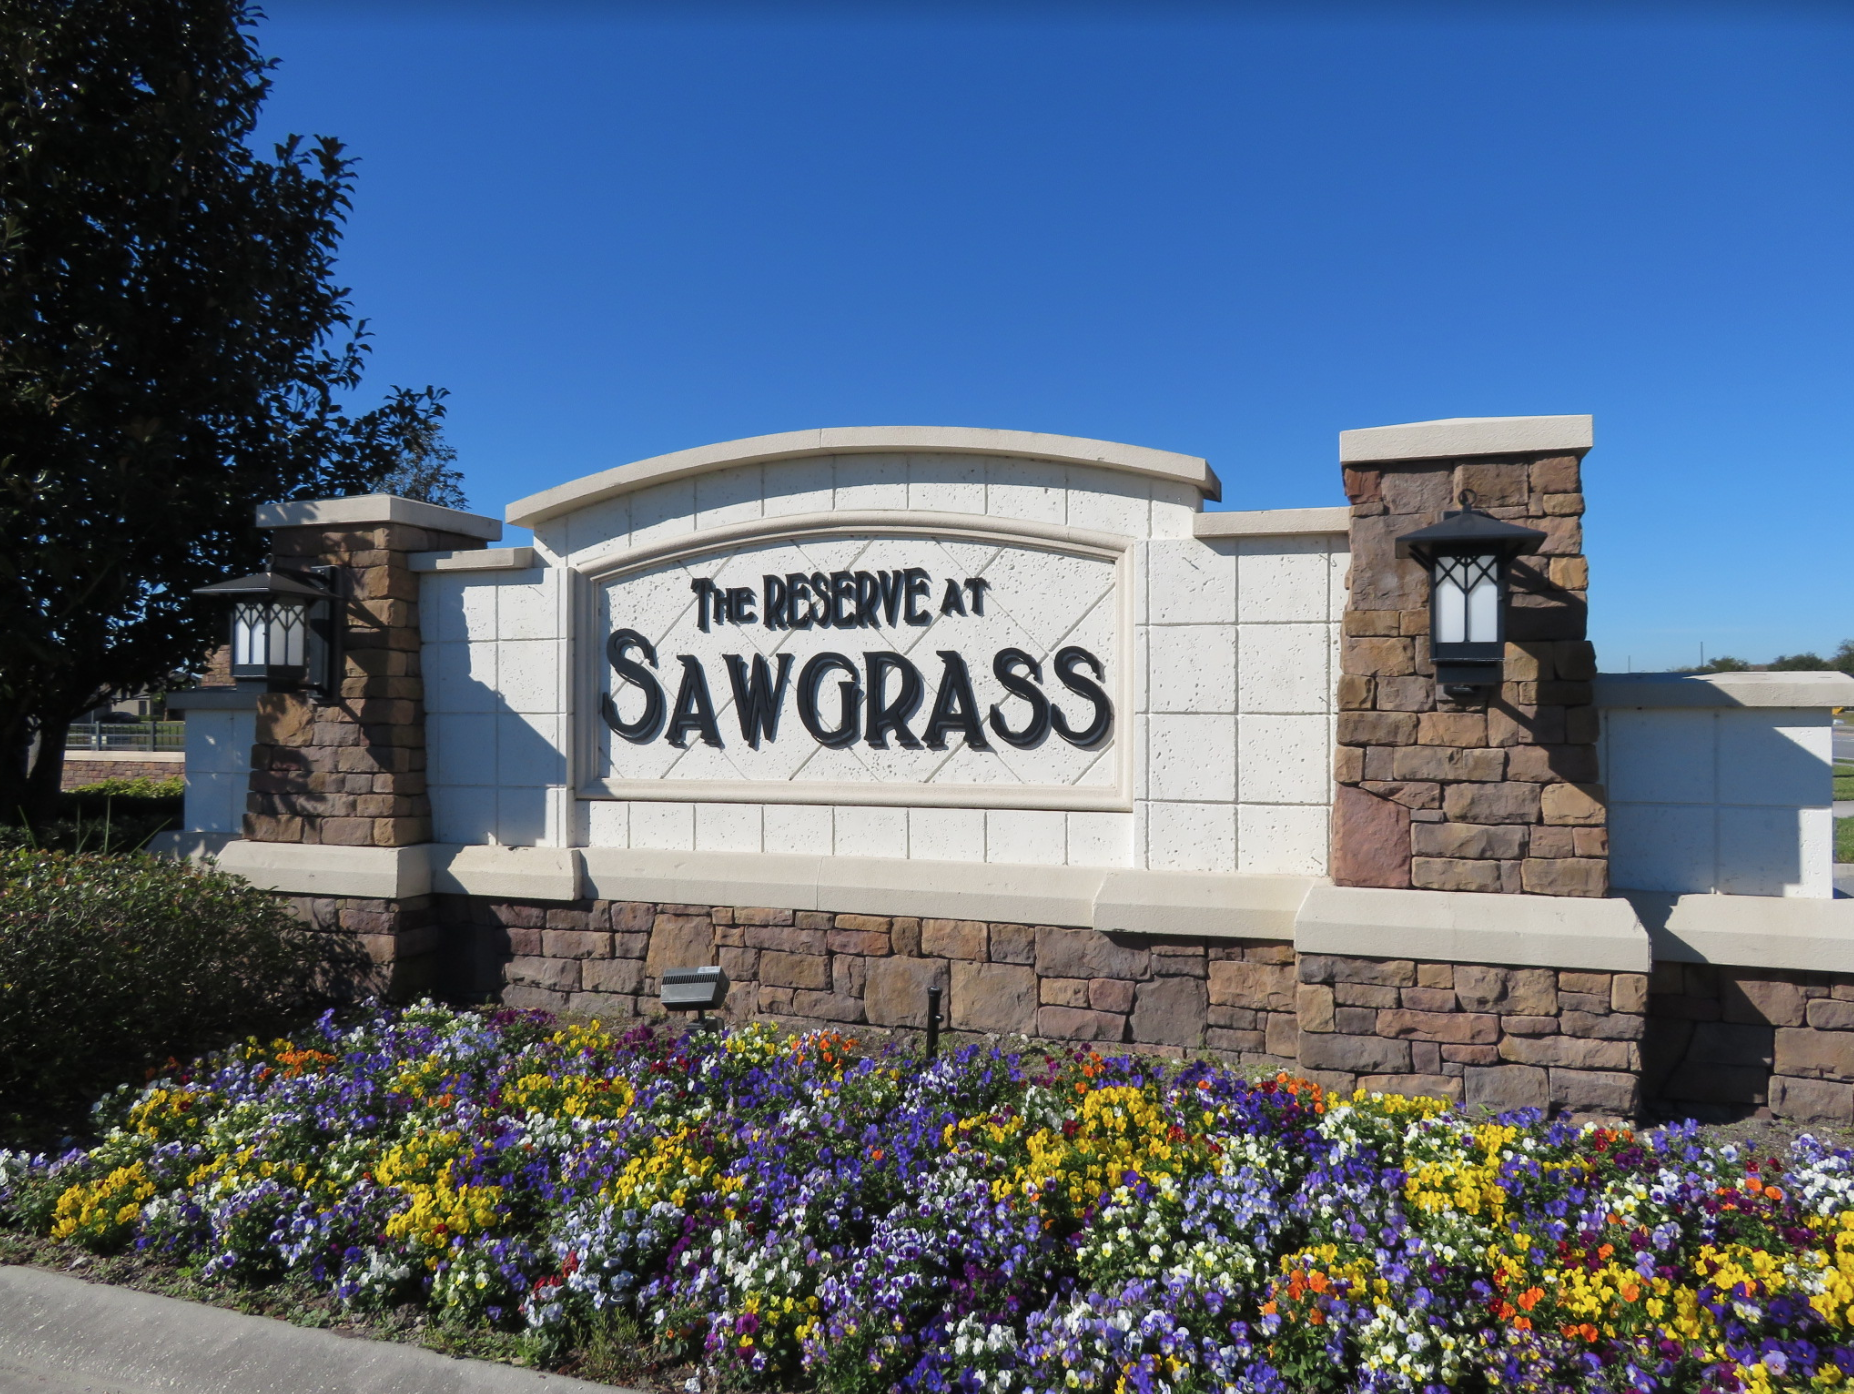 The Reserve at Sawgrass